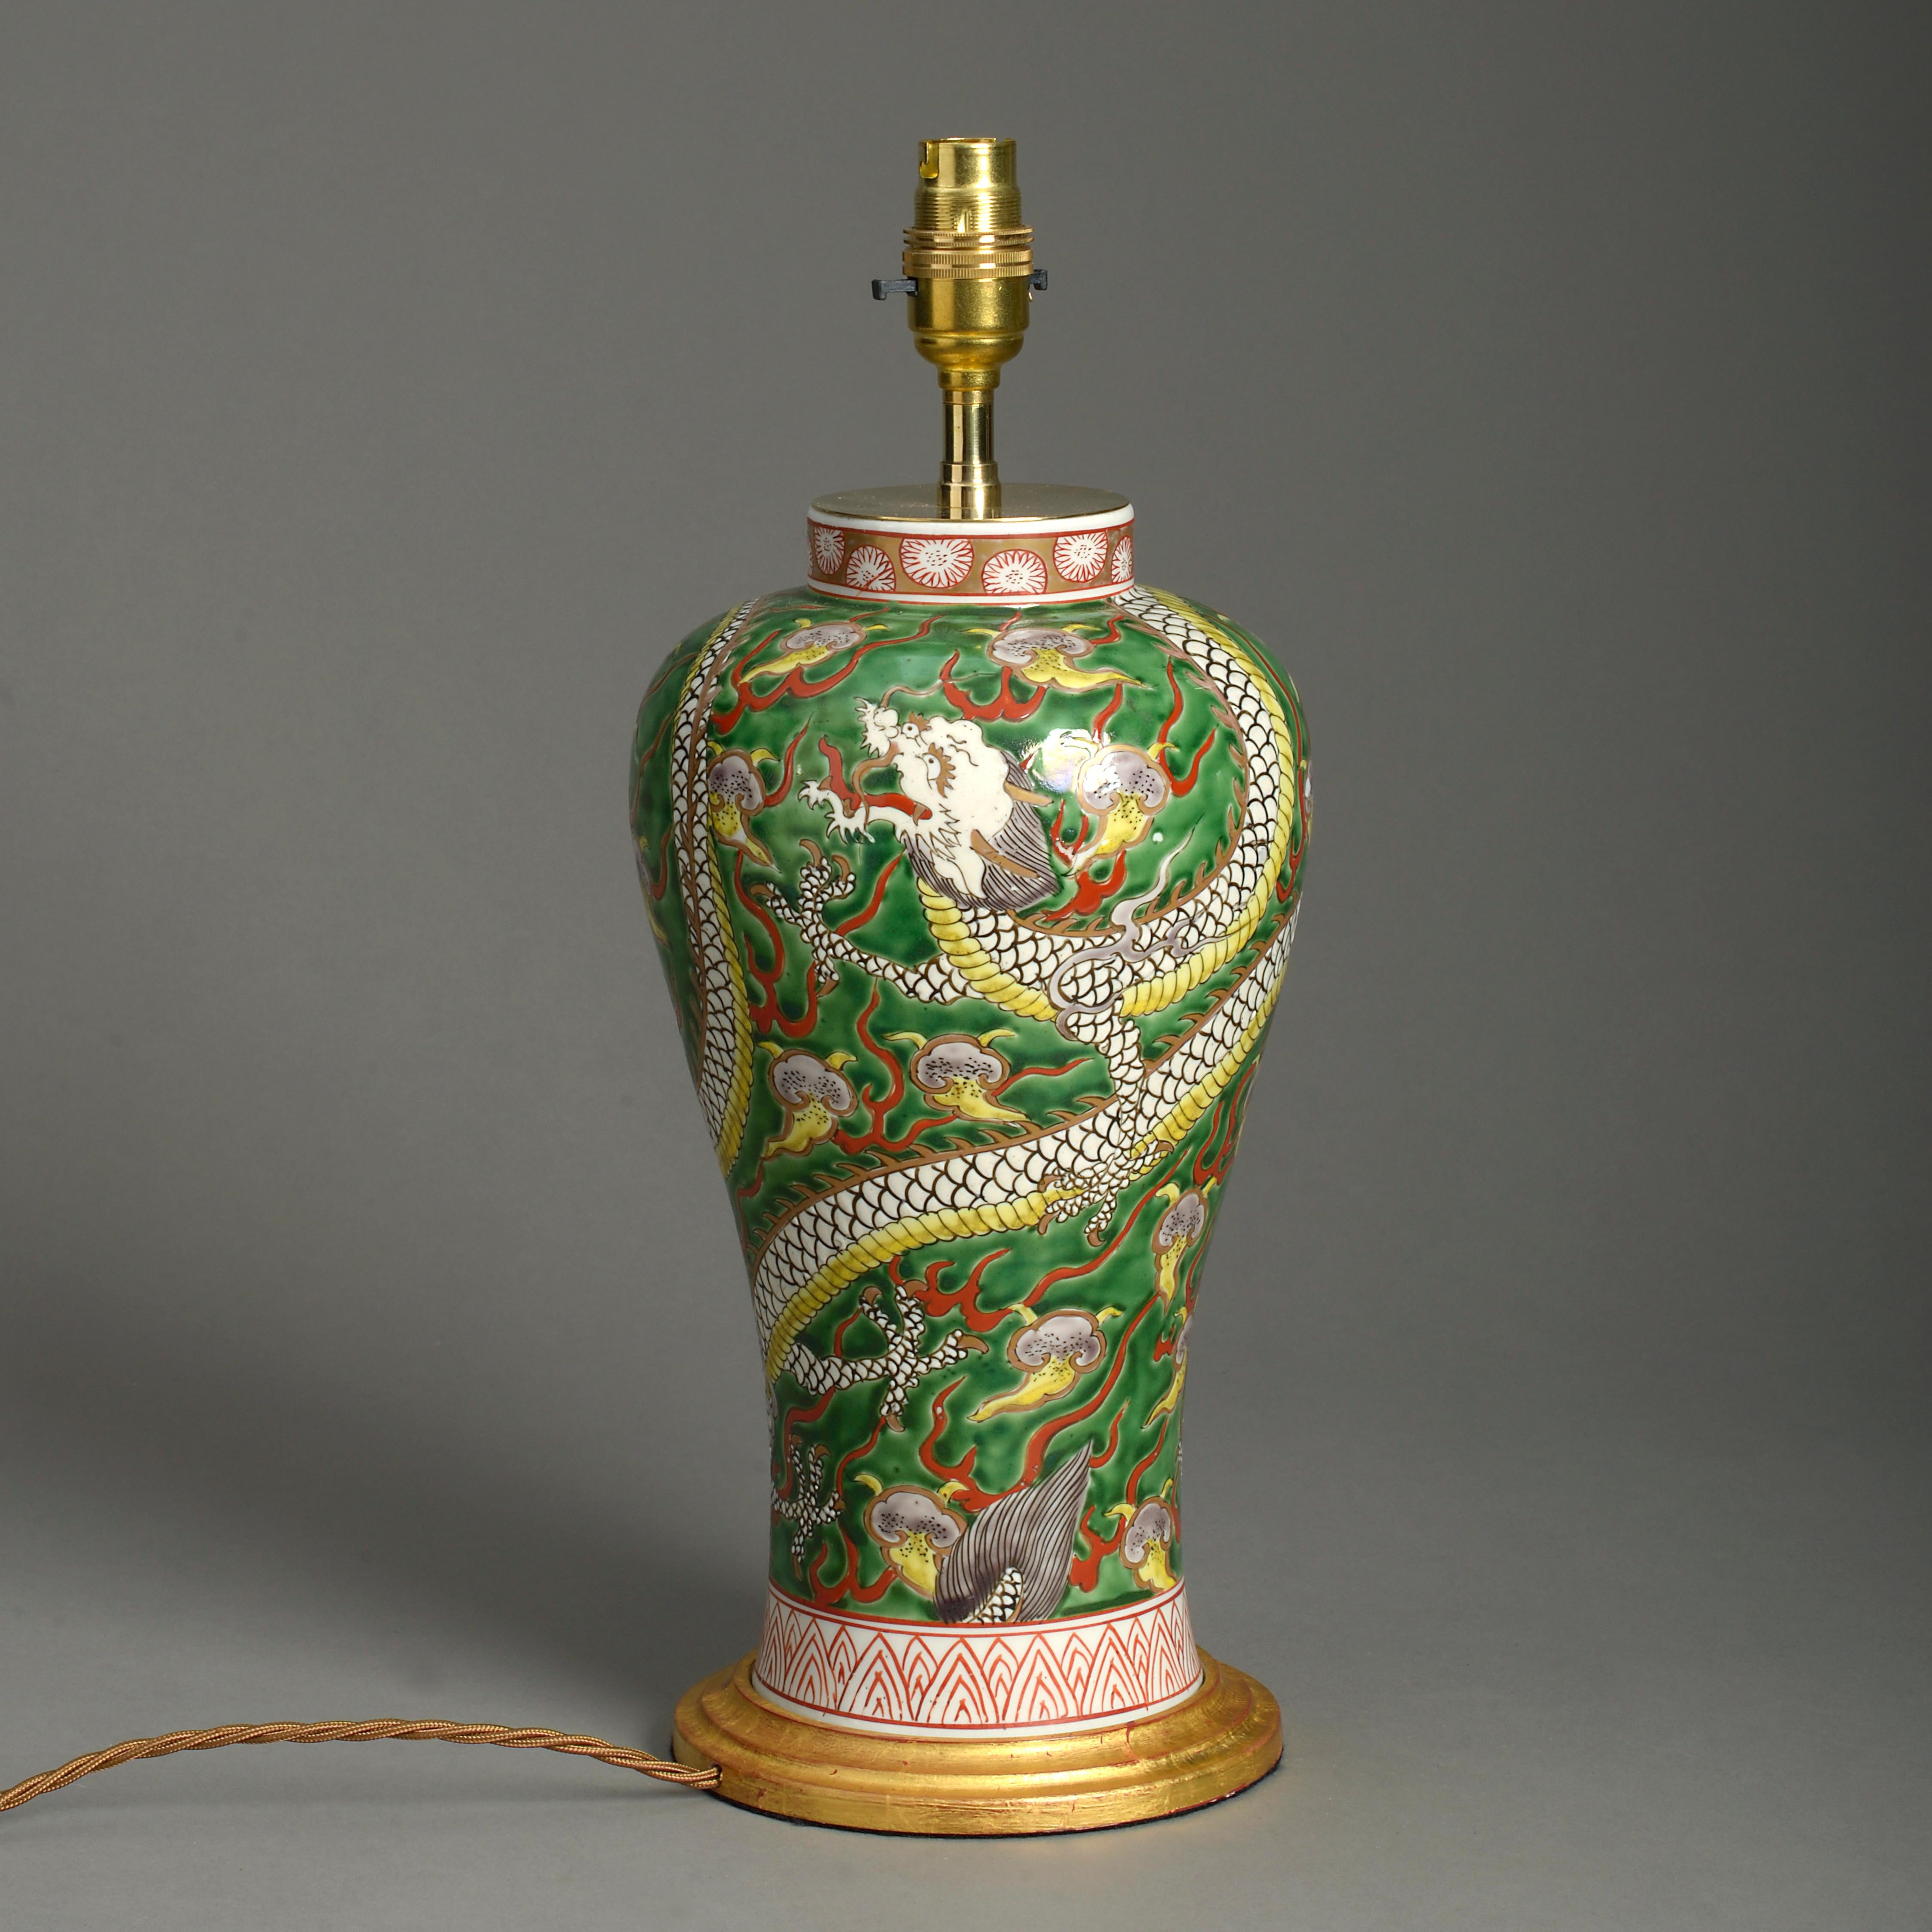 A late 19th century baluster form vase, the body decorated with a polychrome dragon upon a green glazed ground. Now mounted as a lamp and set upon a turned giltwood base.

Dimensions refer to height of vase and base only.

Wired and tested for